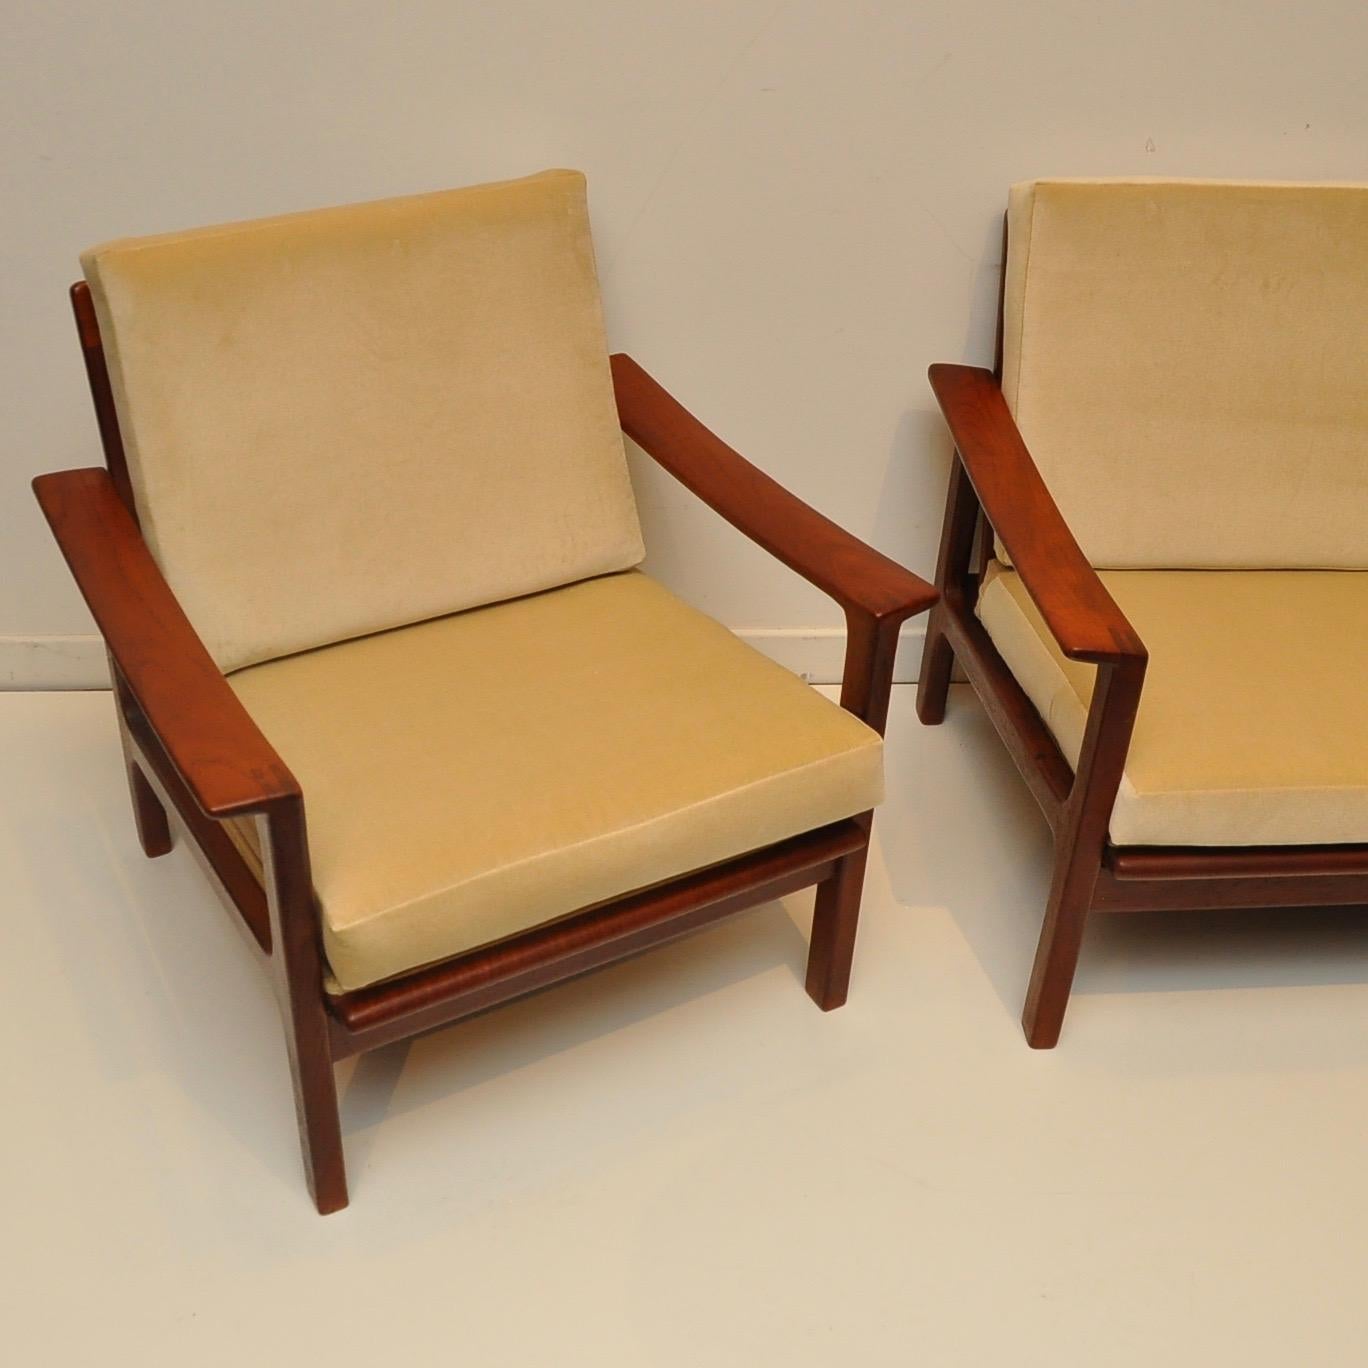 Nice clean Danish modern set in solid teak. New cushions, including foam, and new webbing underneath fabric panels on chair/sofa frames. Fabric is a light beige velvet. Chair dimensions are: 29.25